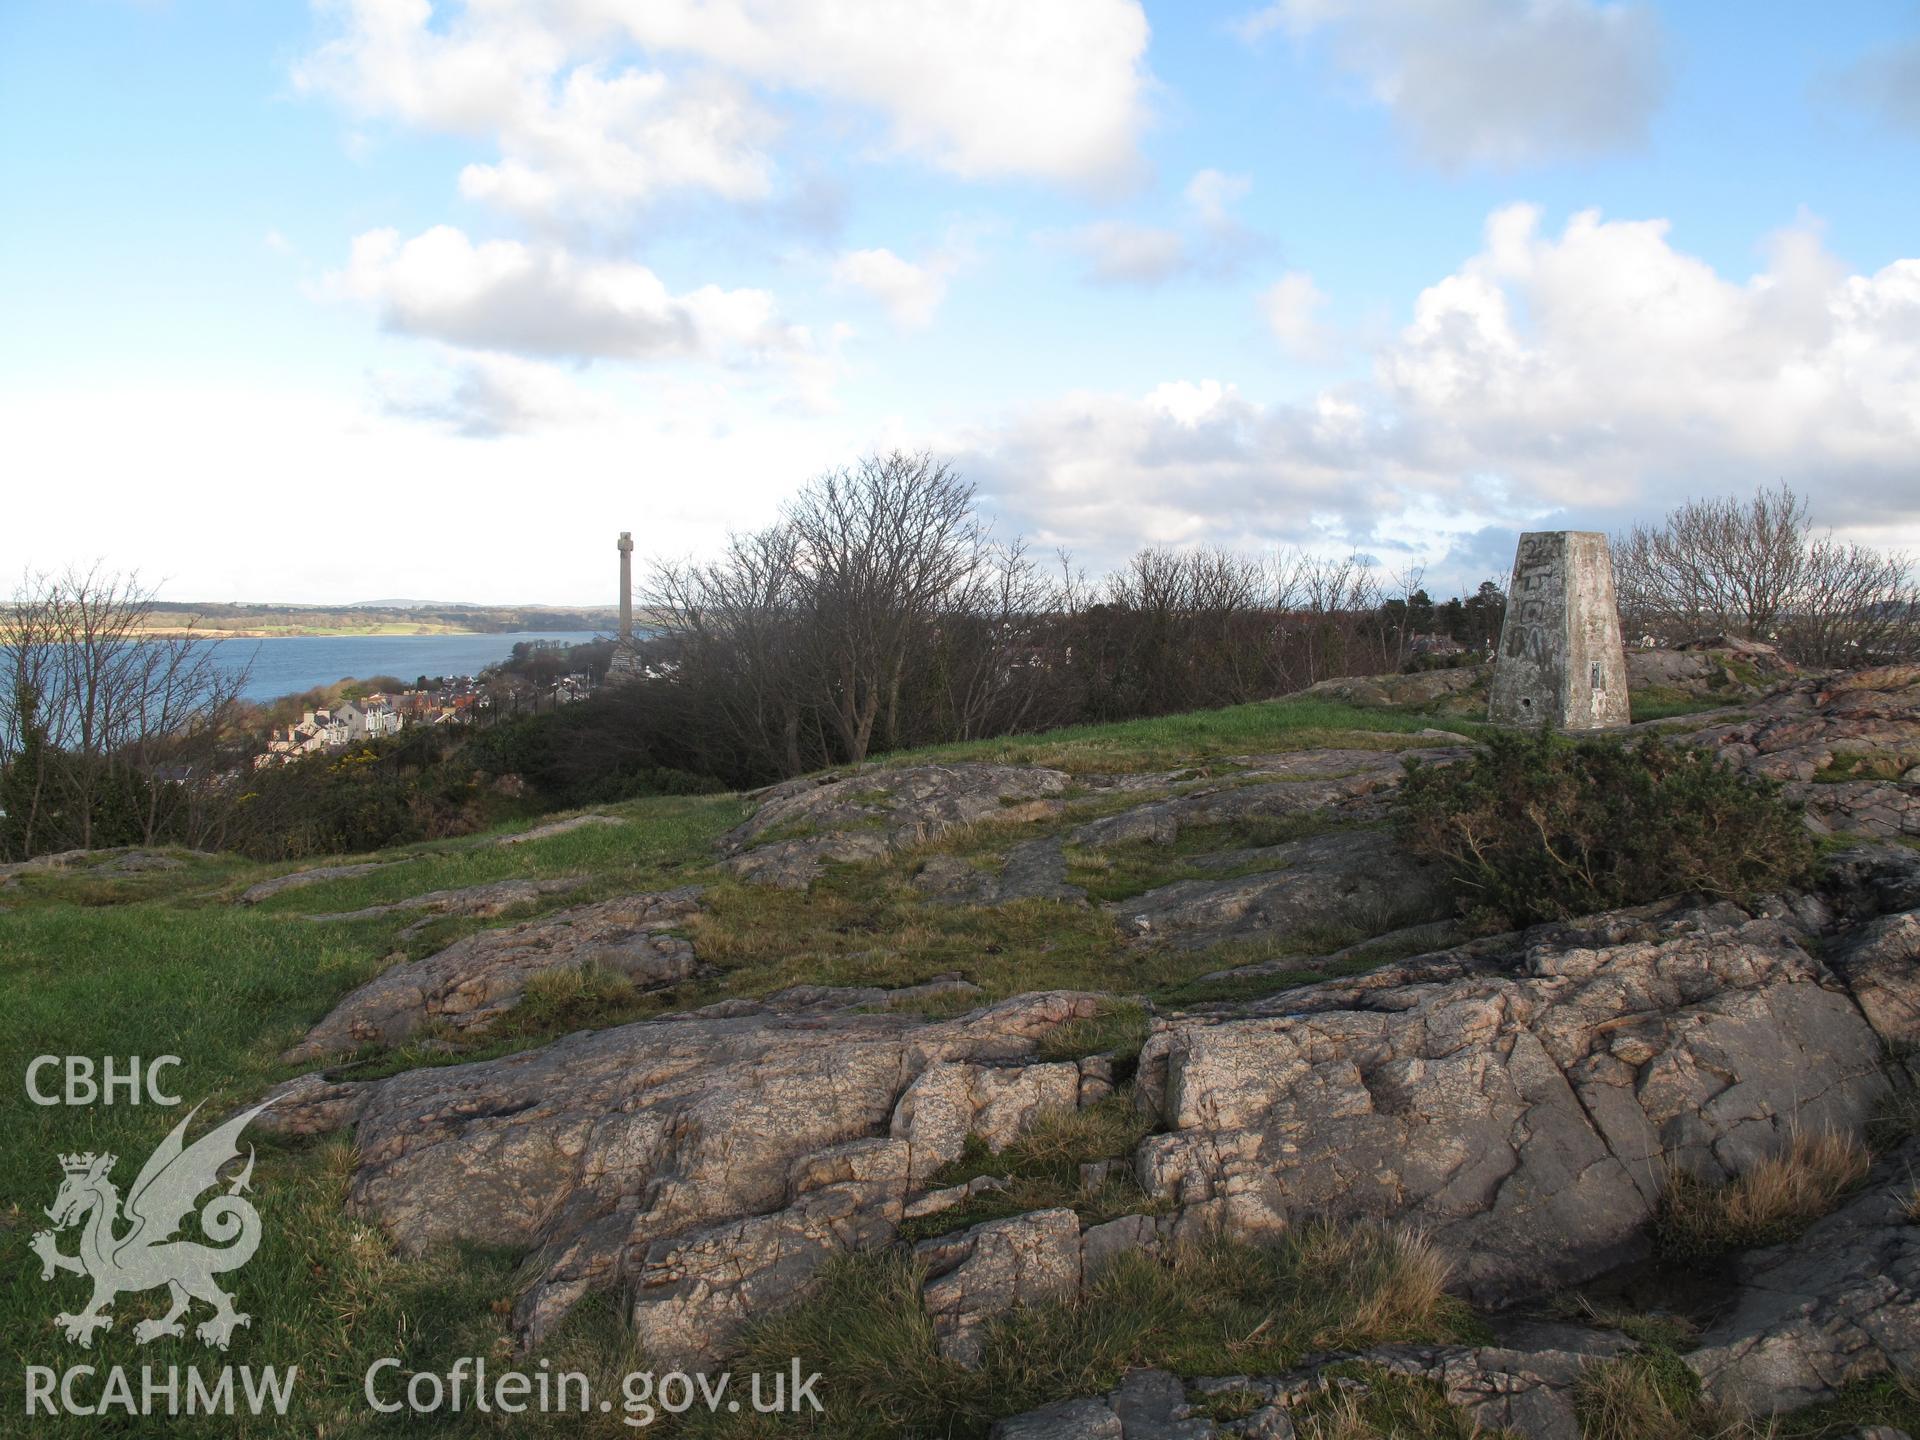 View of Twthill, Caernarfon, from the southwest, taken by Brian Malaws on 21 December 2009.